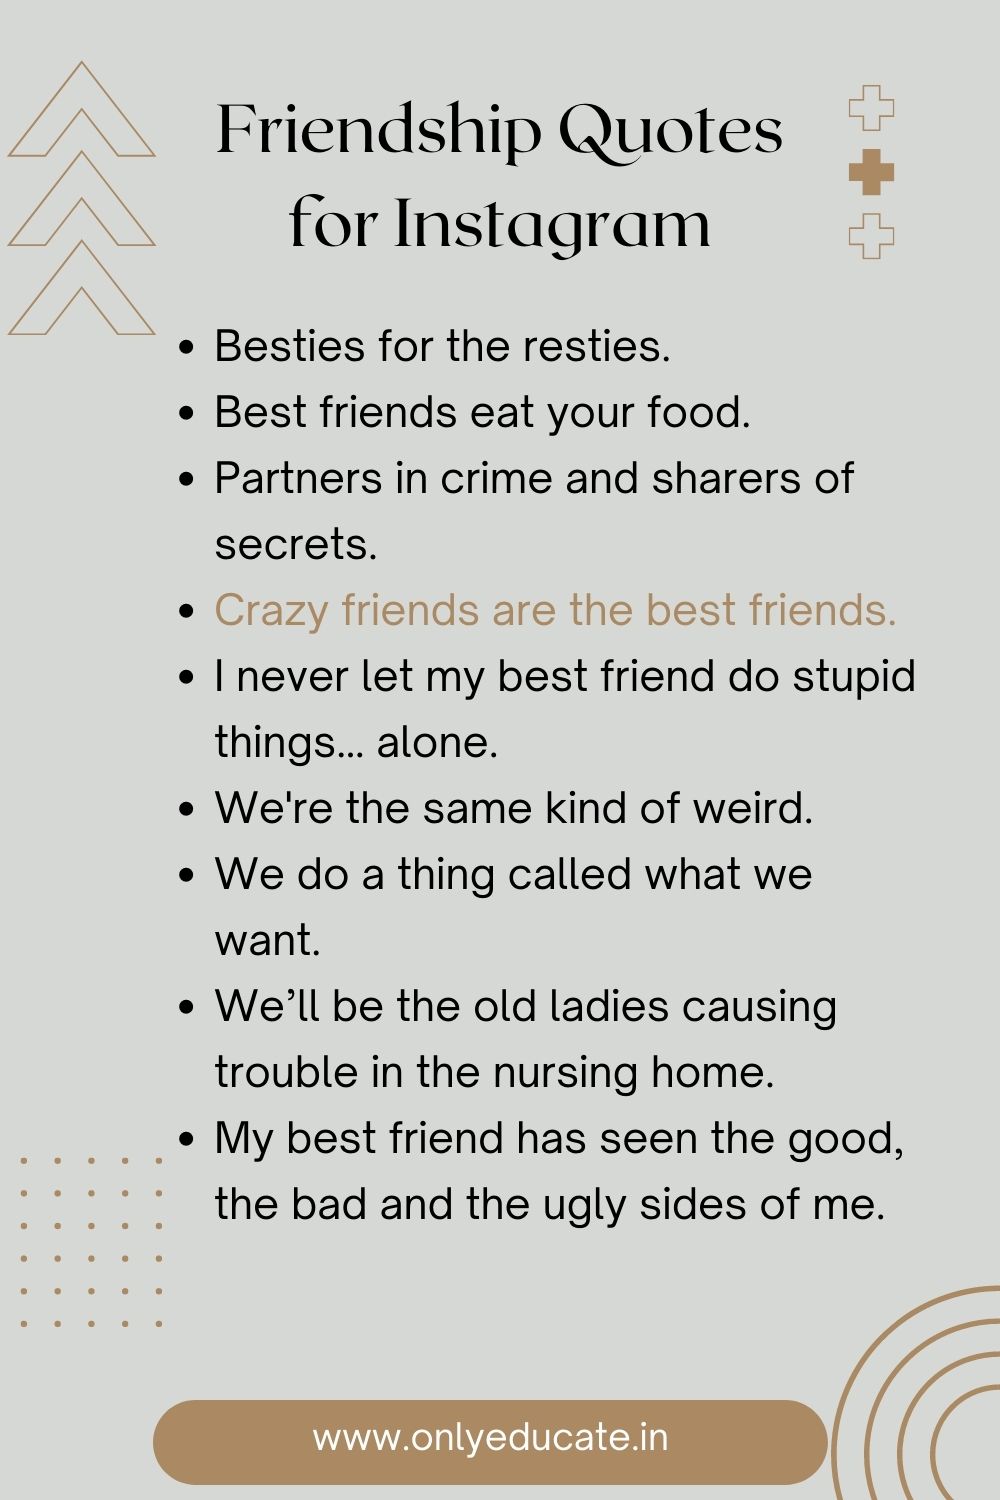 150+ Friendship Quotes for Instagram » Only Educate